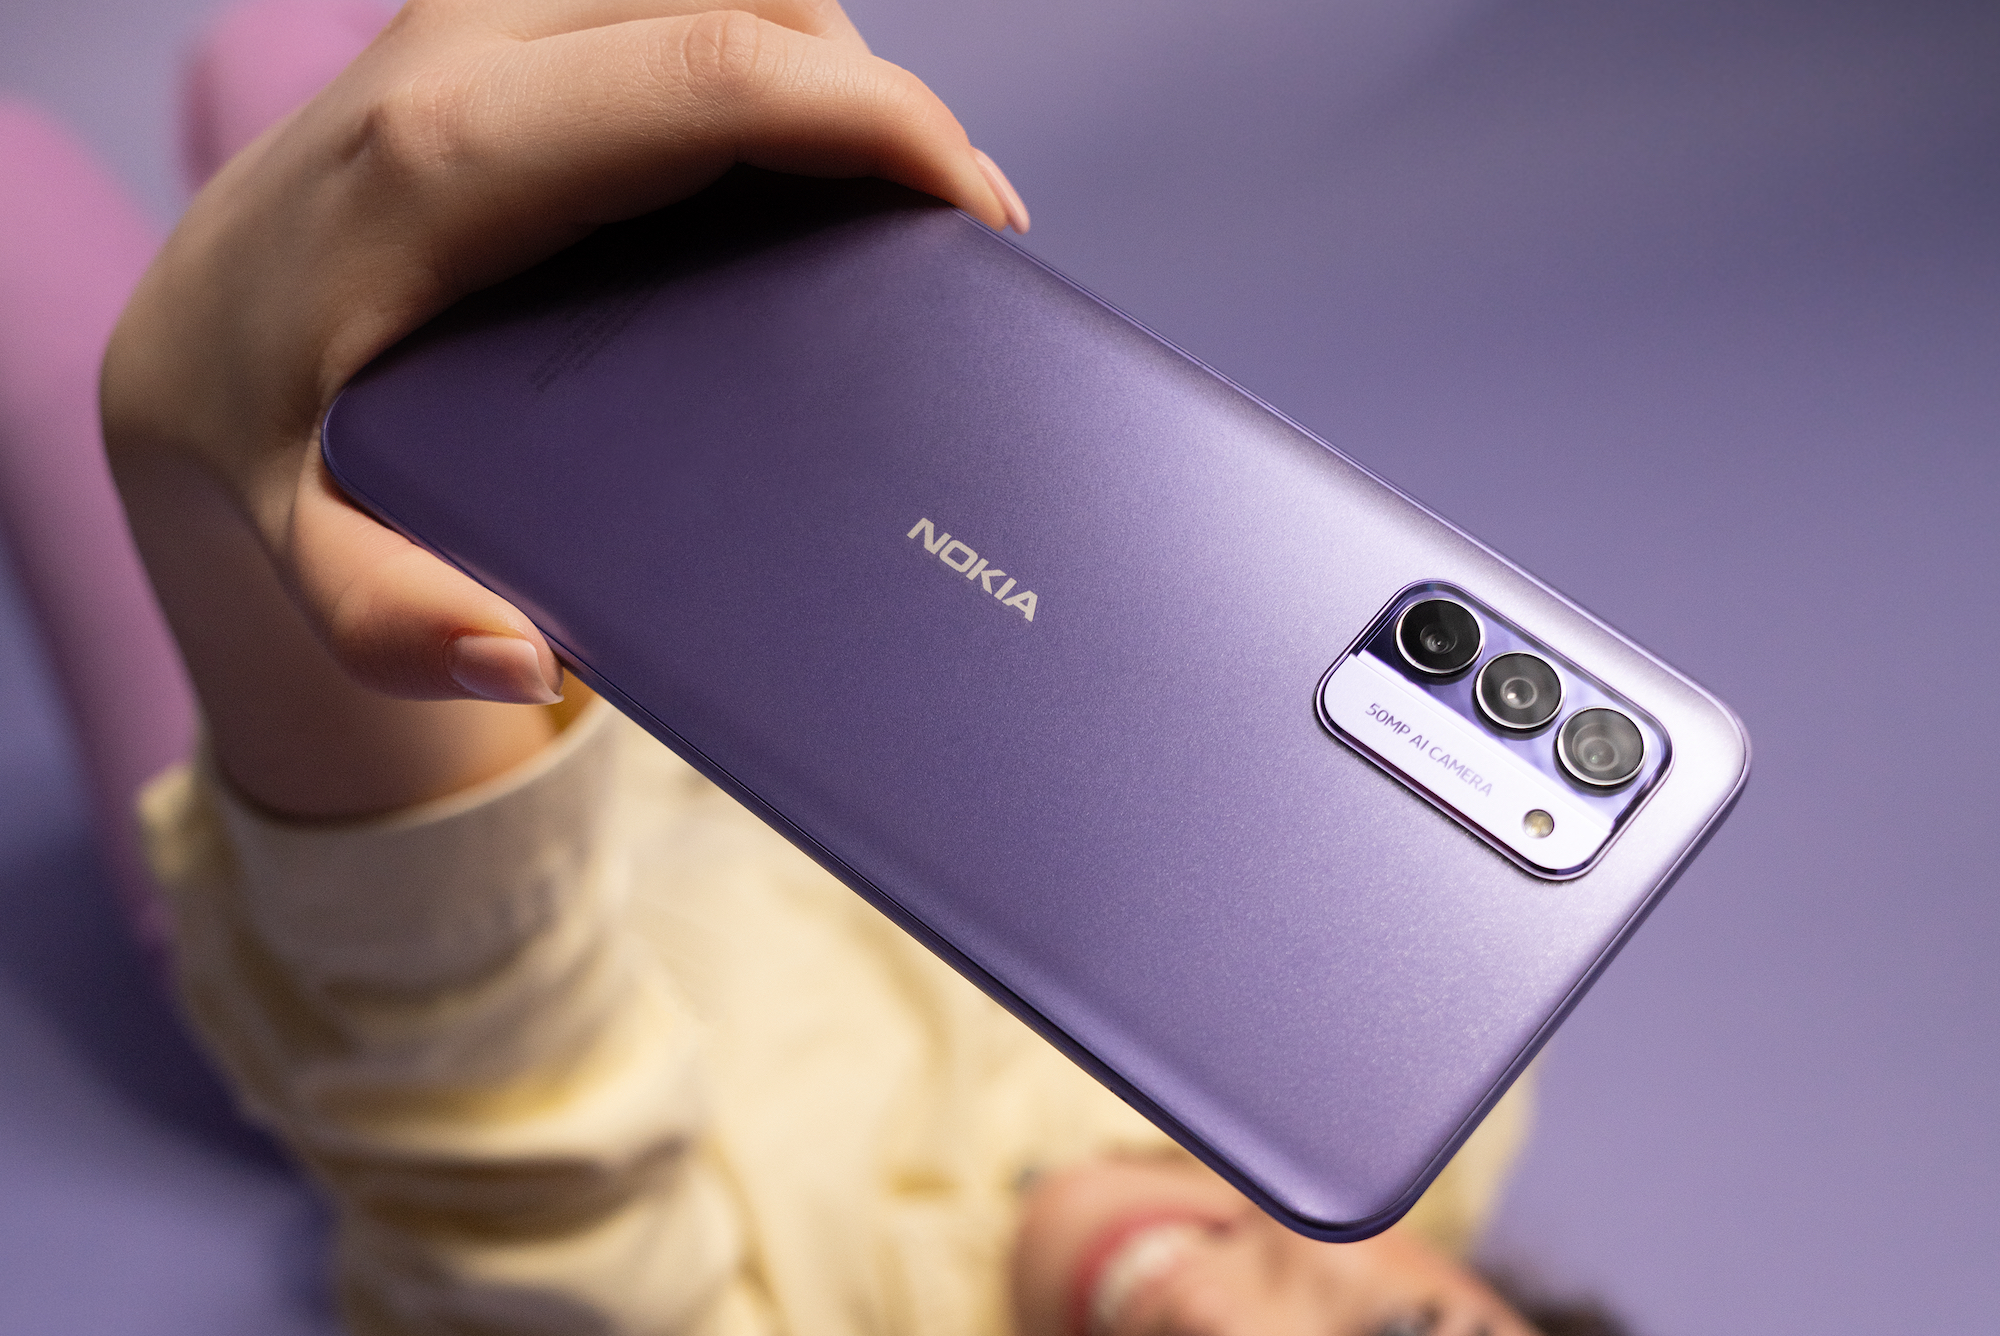 Nokia launches its first Android smartphone